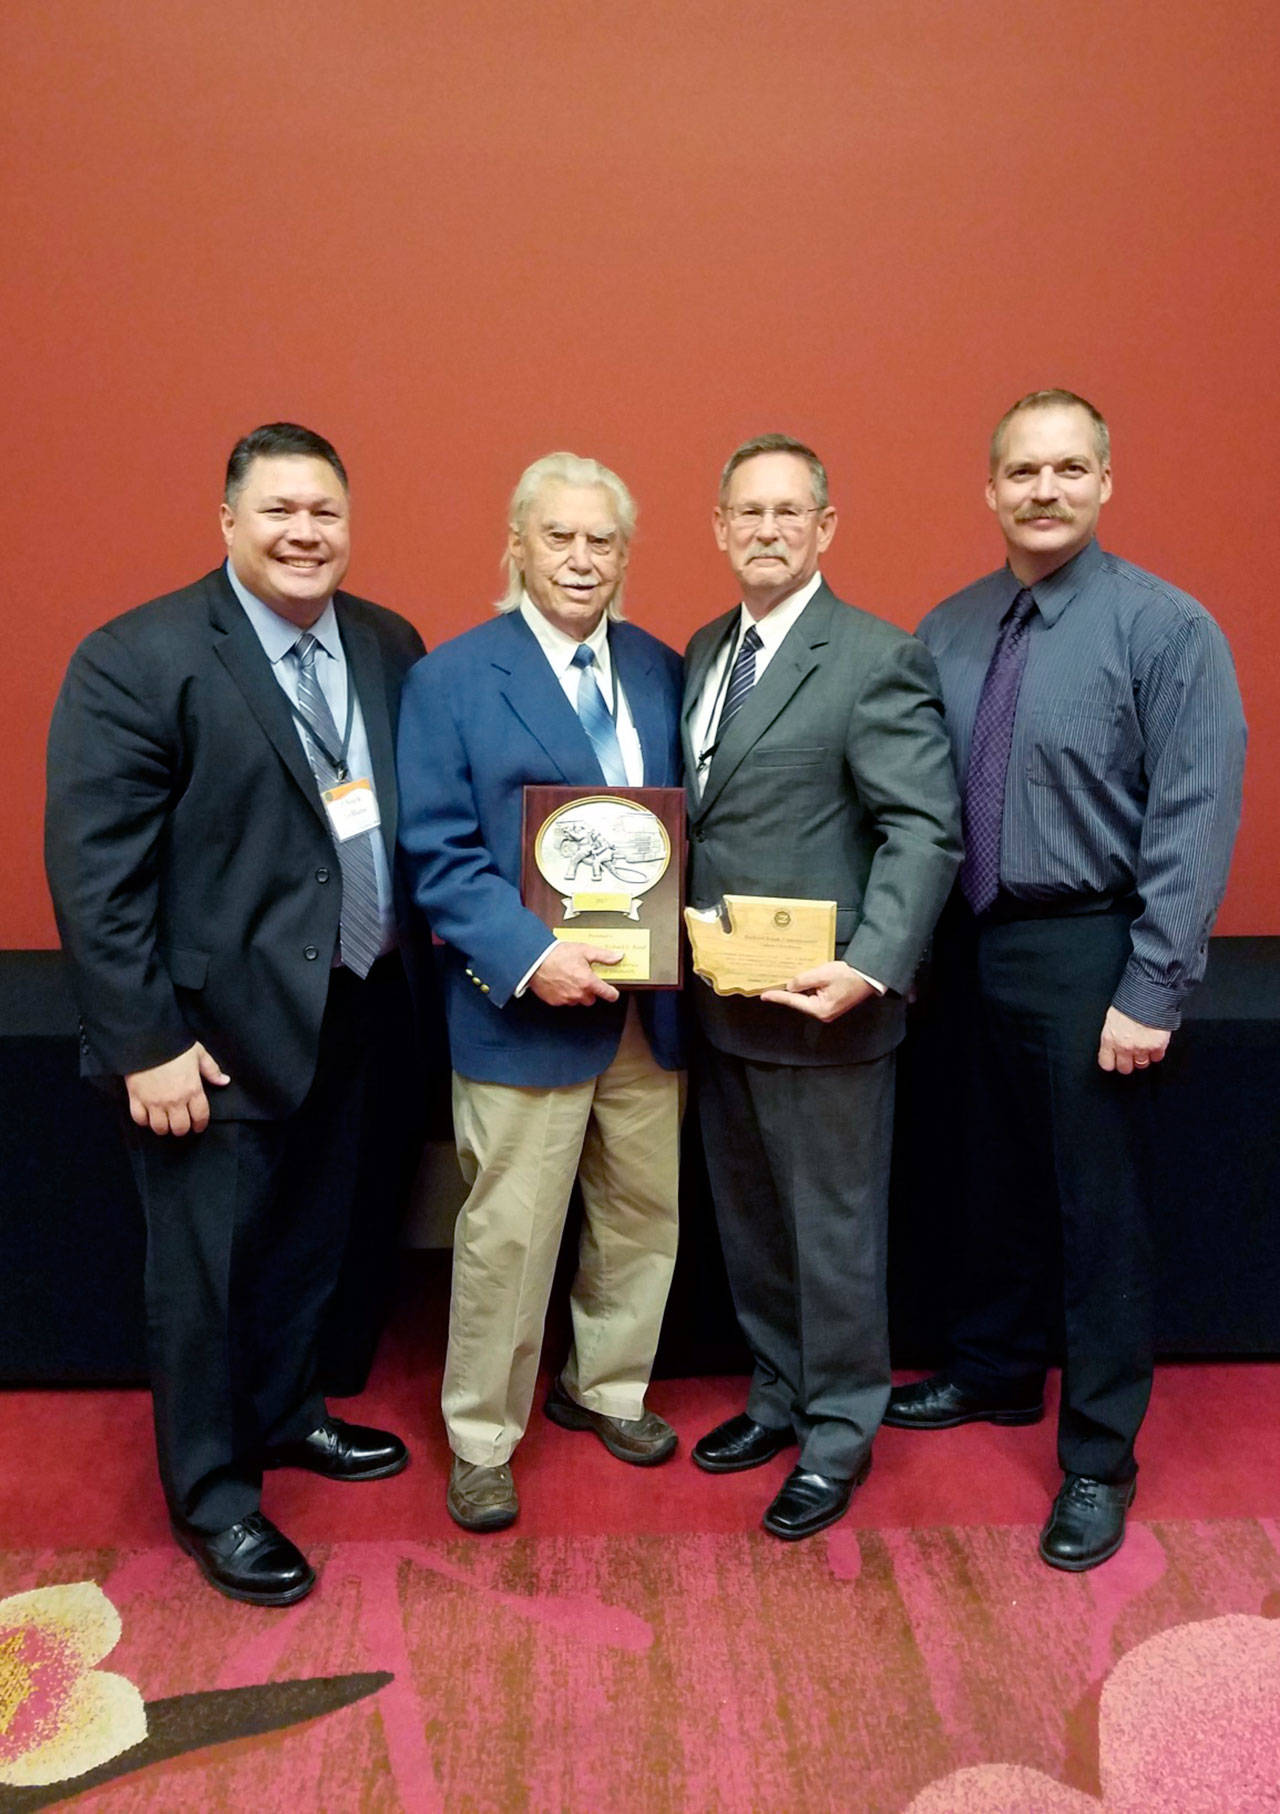 Pictured from left are State Fire Marshal Charles LeBlanc, Clallam County Fire District No. 2 Commissioner Richard Ruud, Fire Chief Sam Phillips and Deputy Fire Chief Jake Patterson. (Clallam County Fire District No. 2)